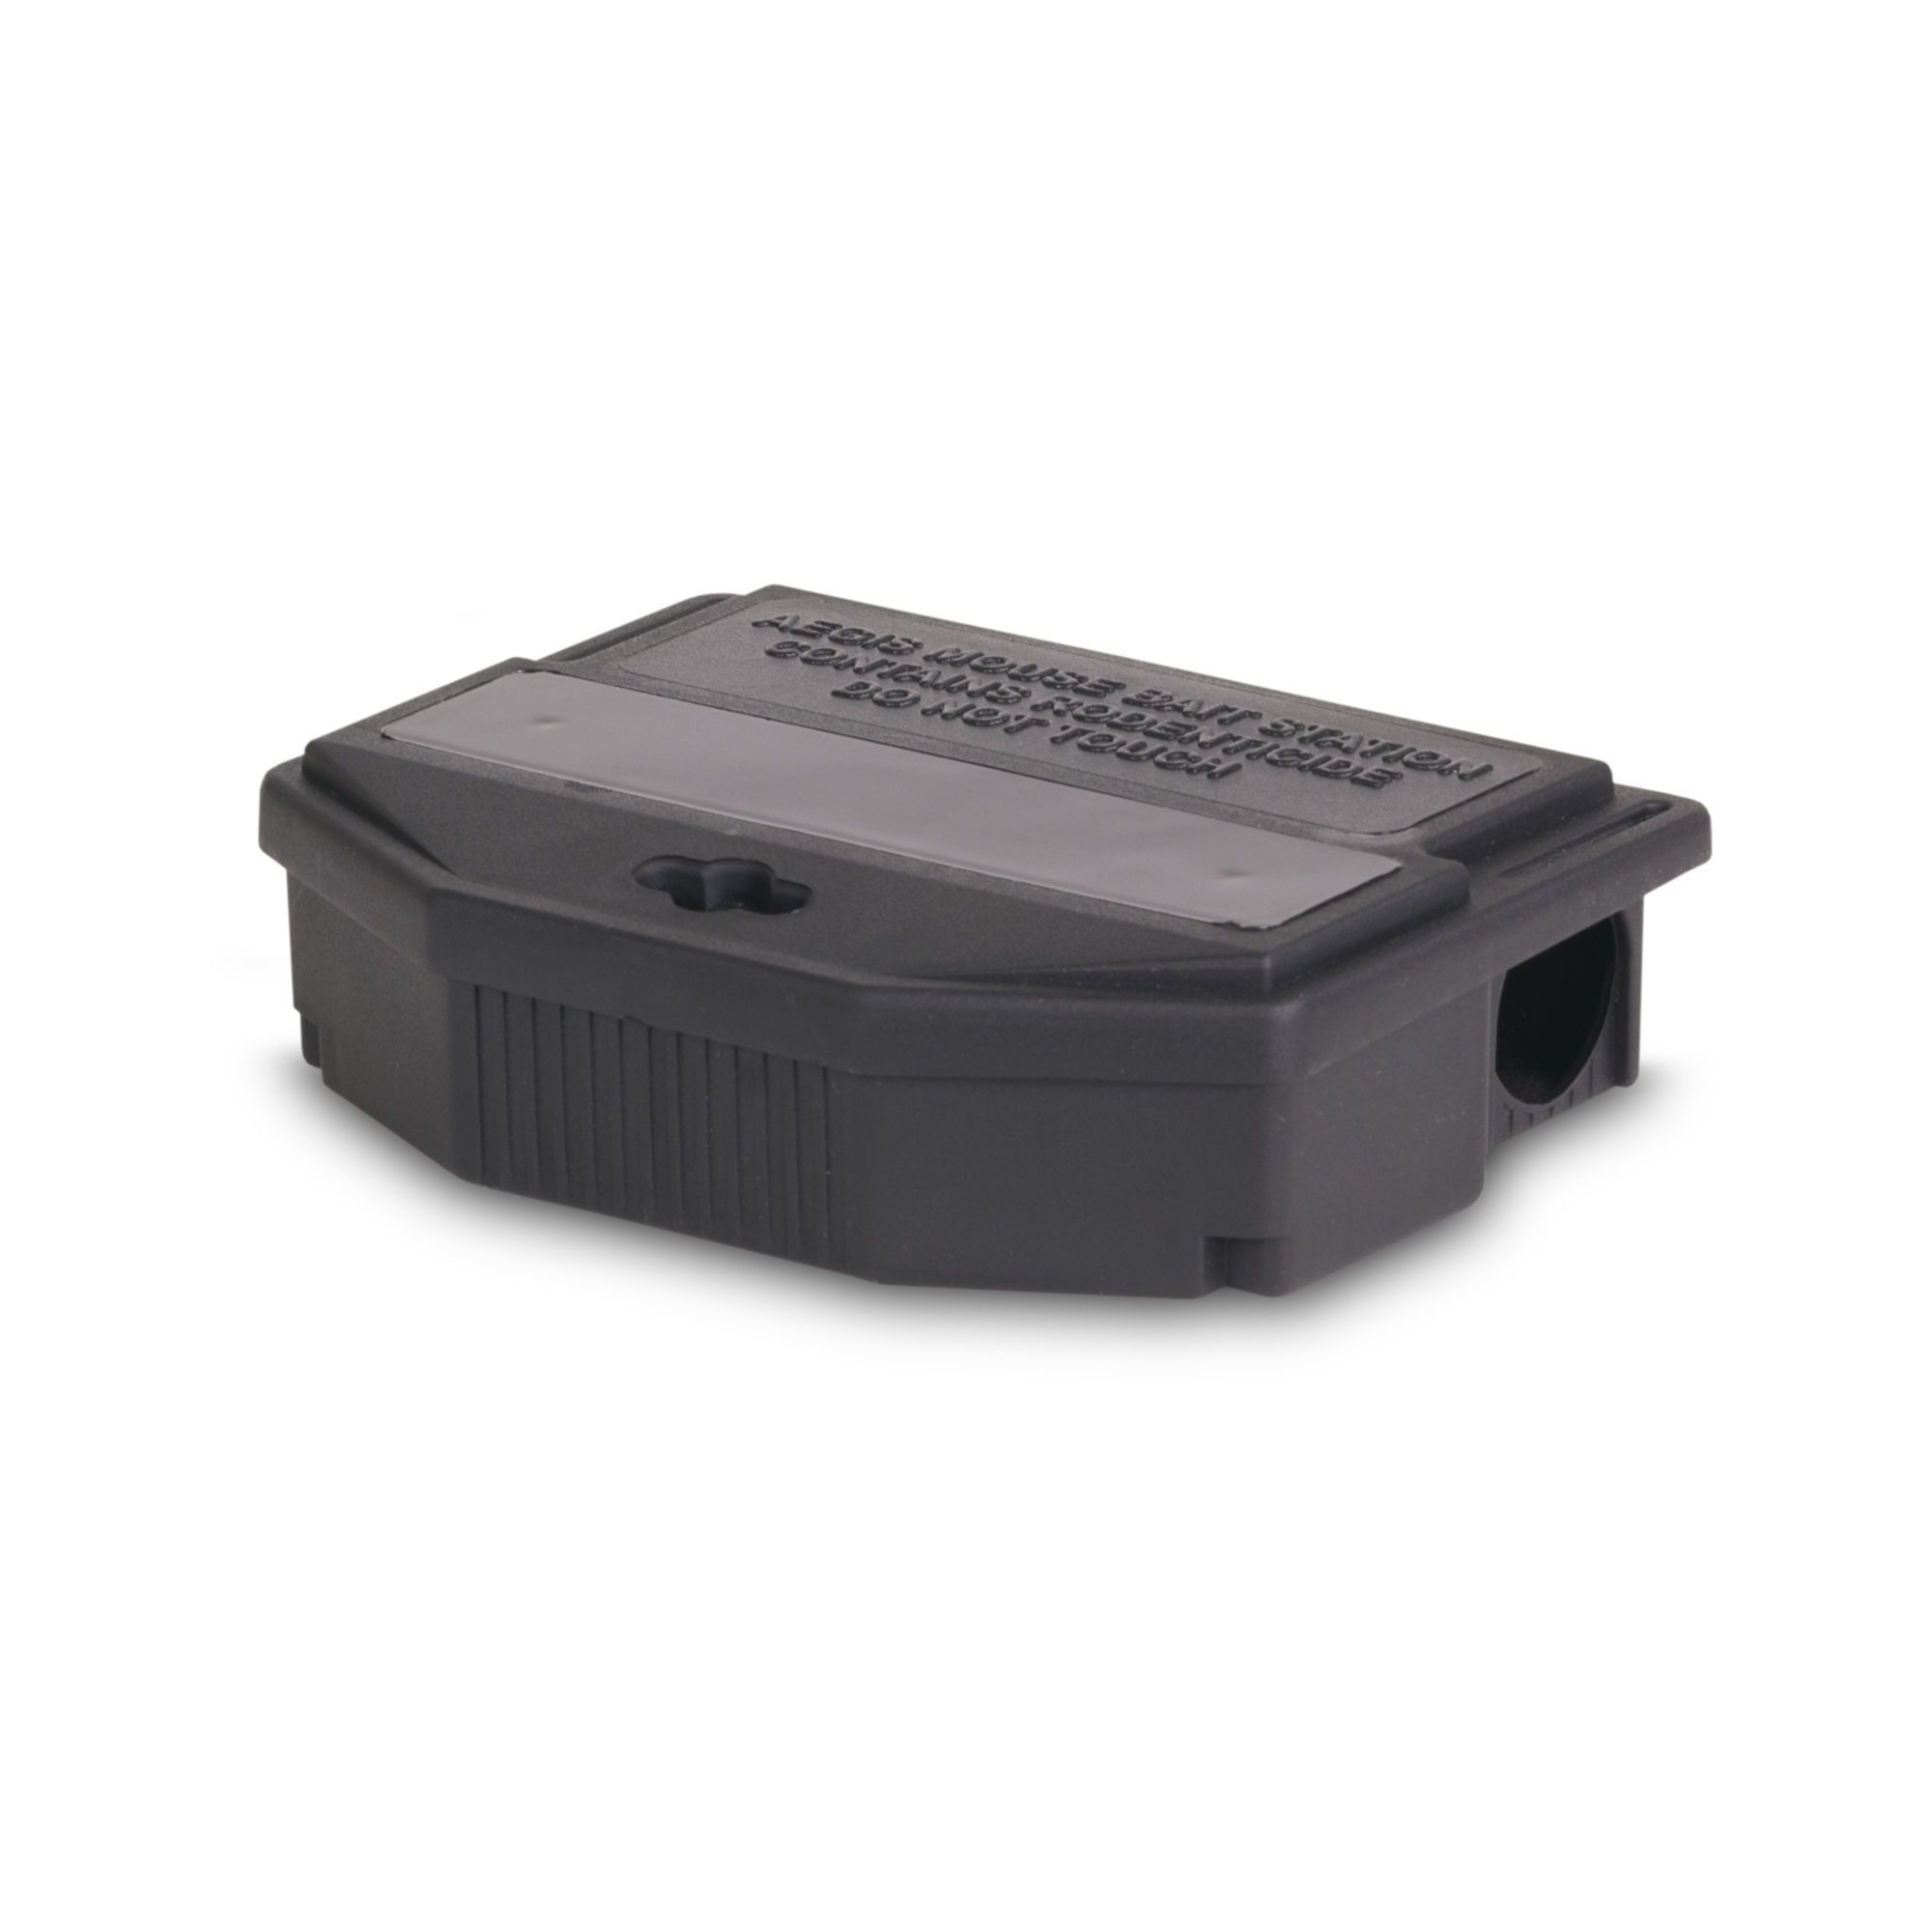 Bait station for mice from VETOQUINOL